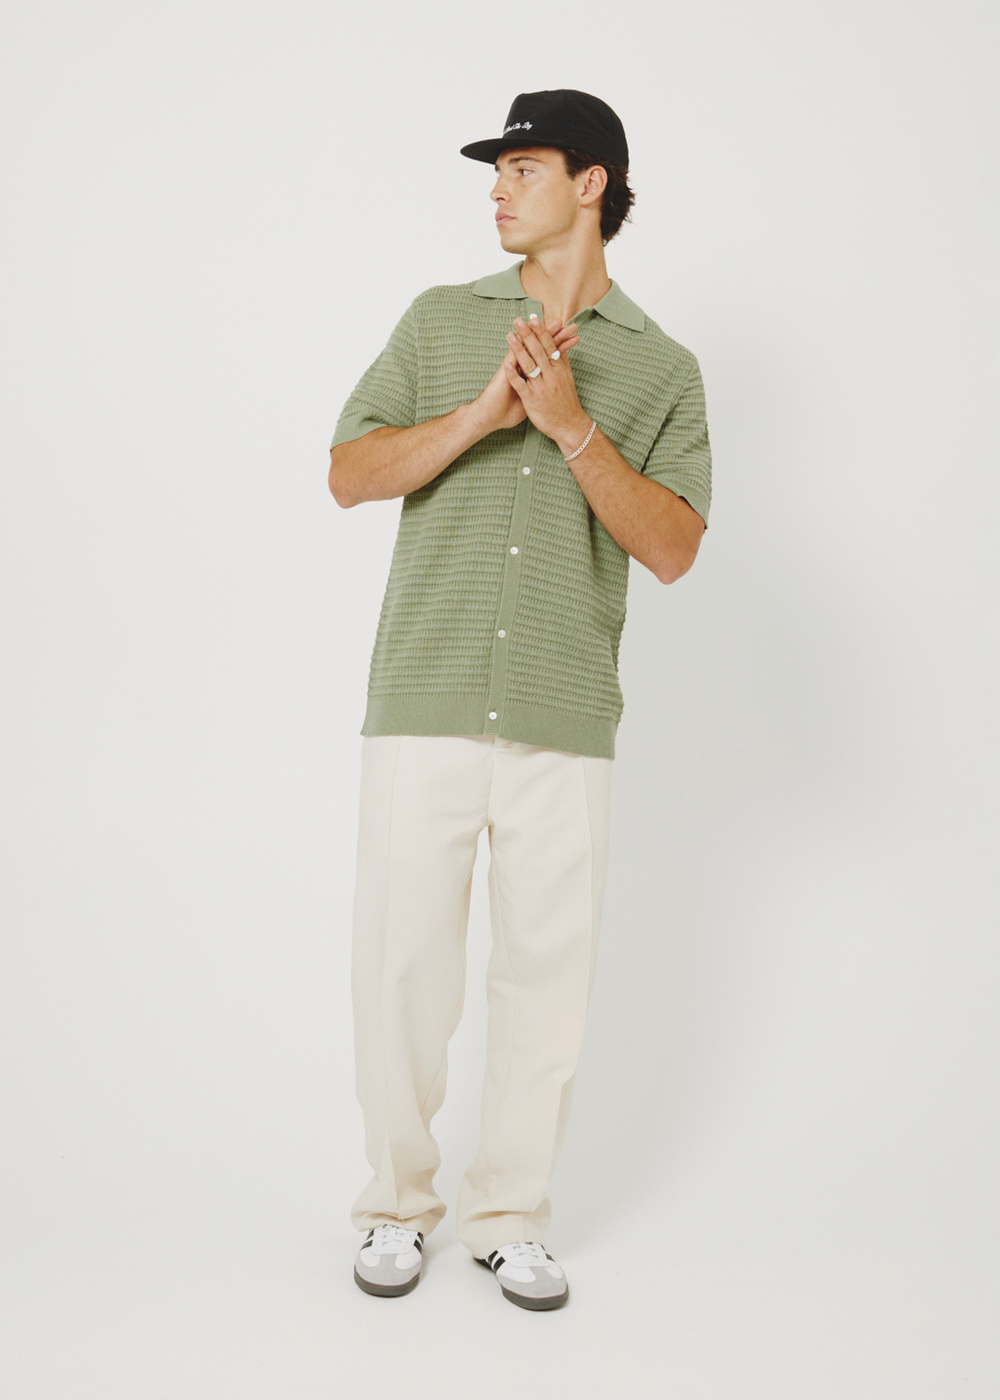 VERONA KNIT S/S SHIRT OLIVE | Kore Studios | Mad About The Boy